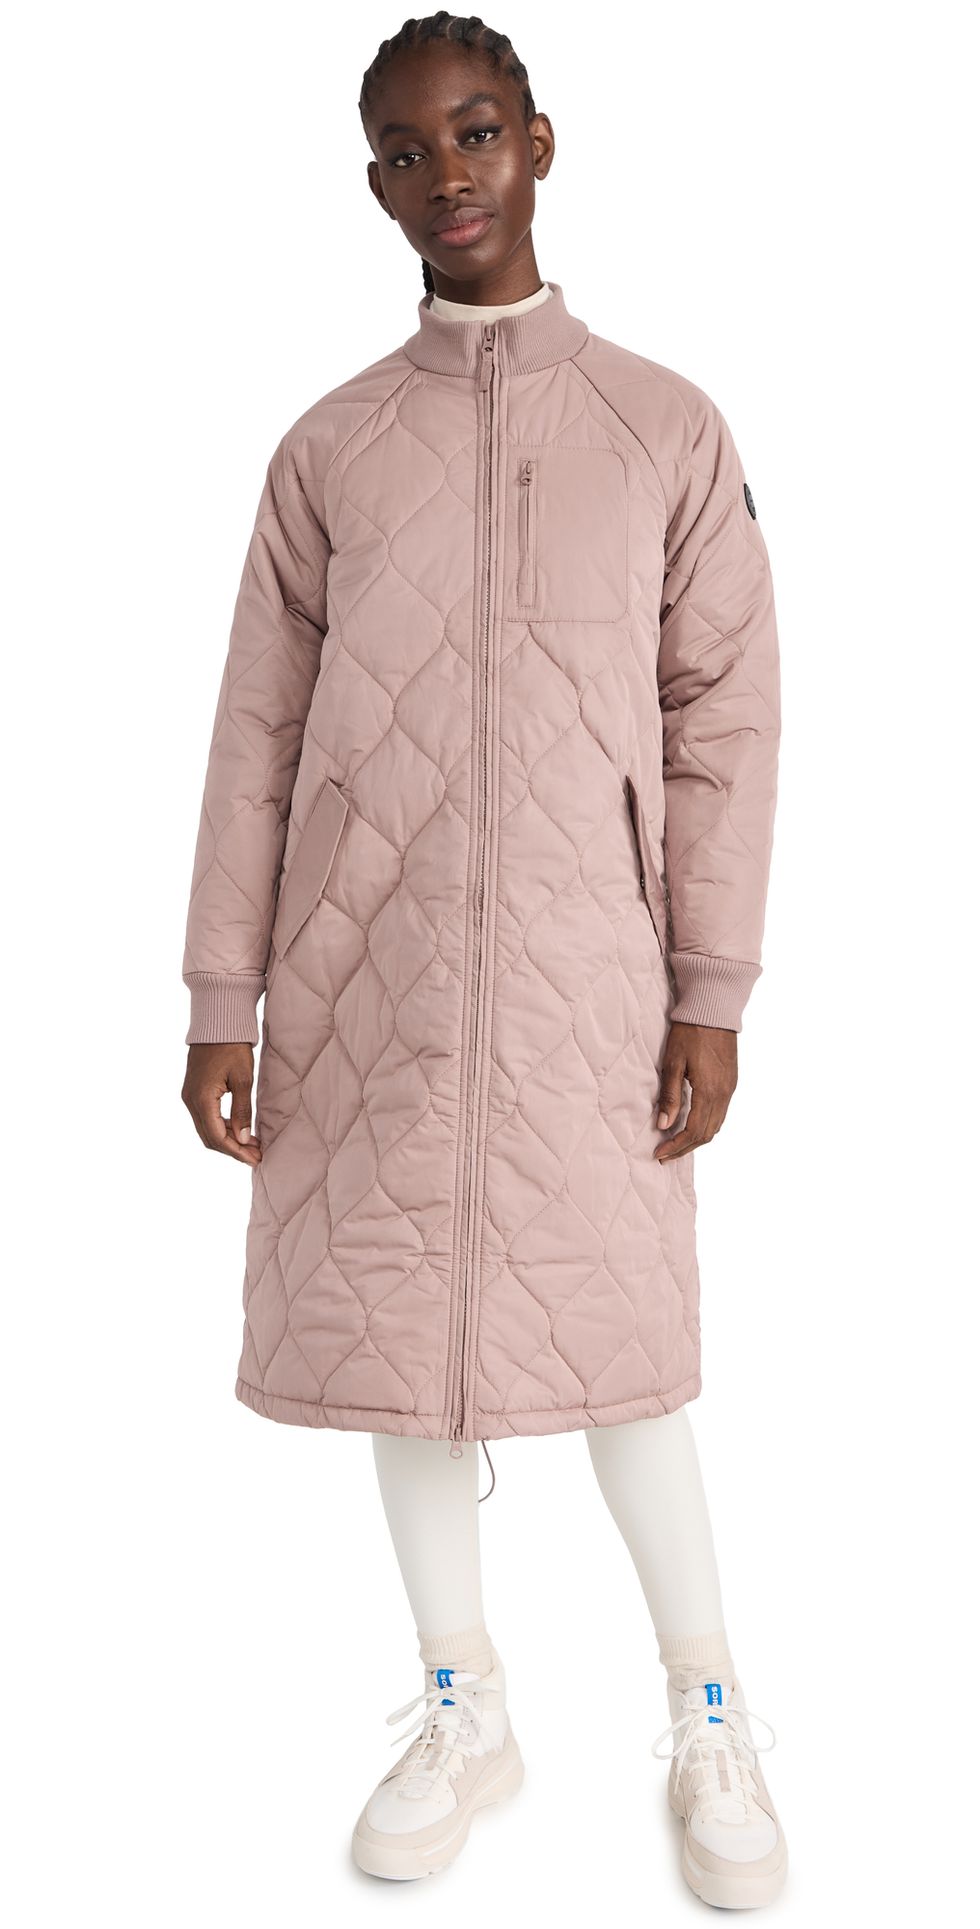 Sweaty Betty on The Move Quilted Jacket